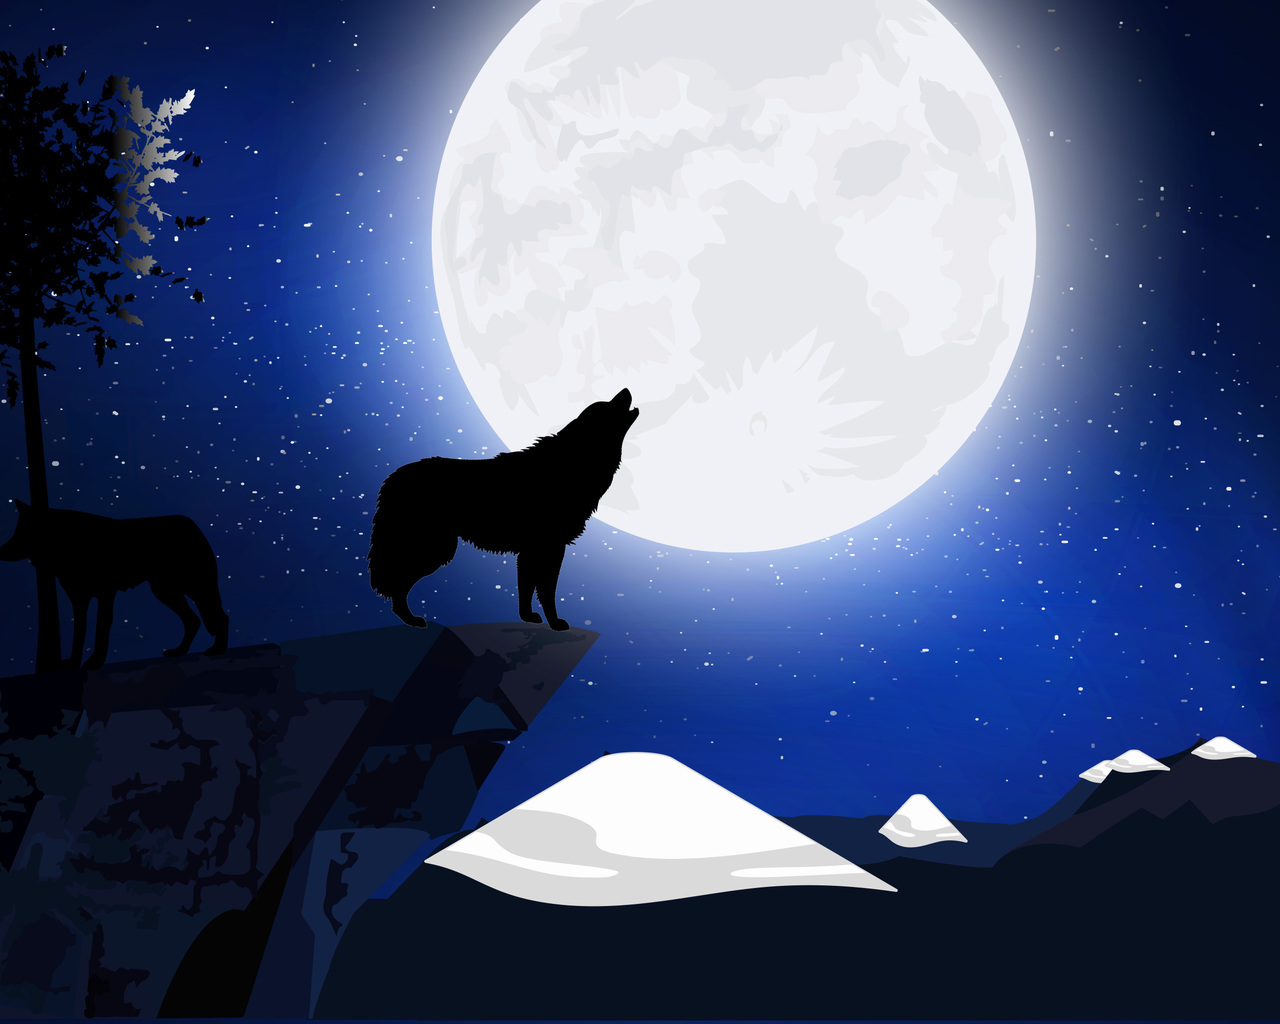 4k-wallpapers. wolf-wallpapers. howling-wallpapers. moon-wallpapers. ...